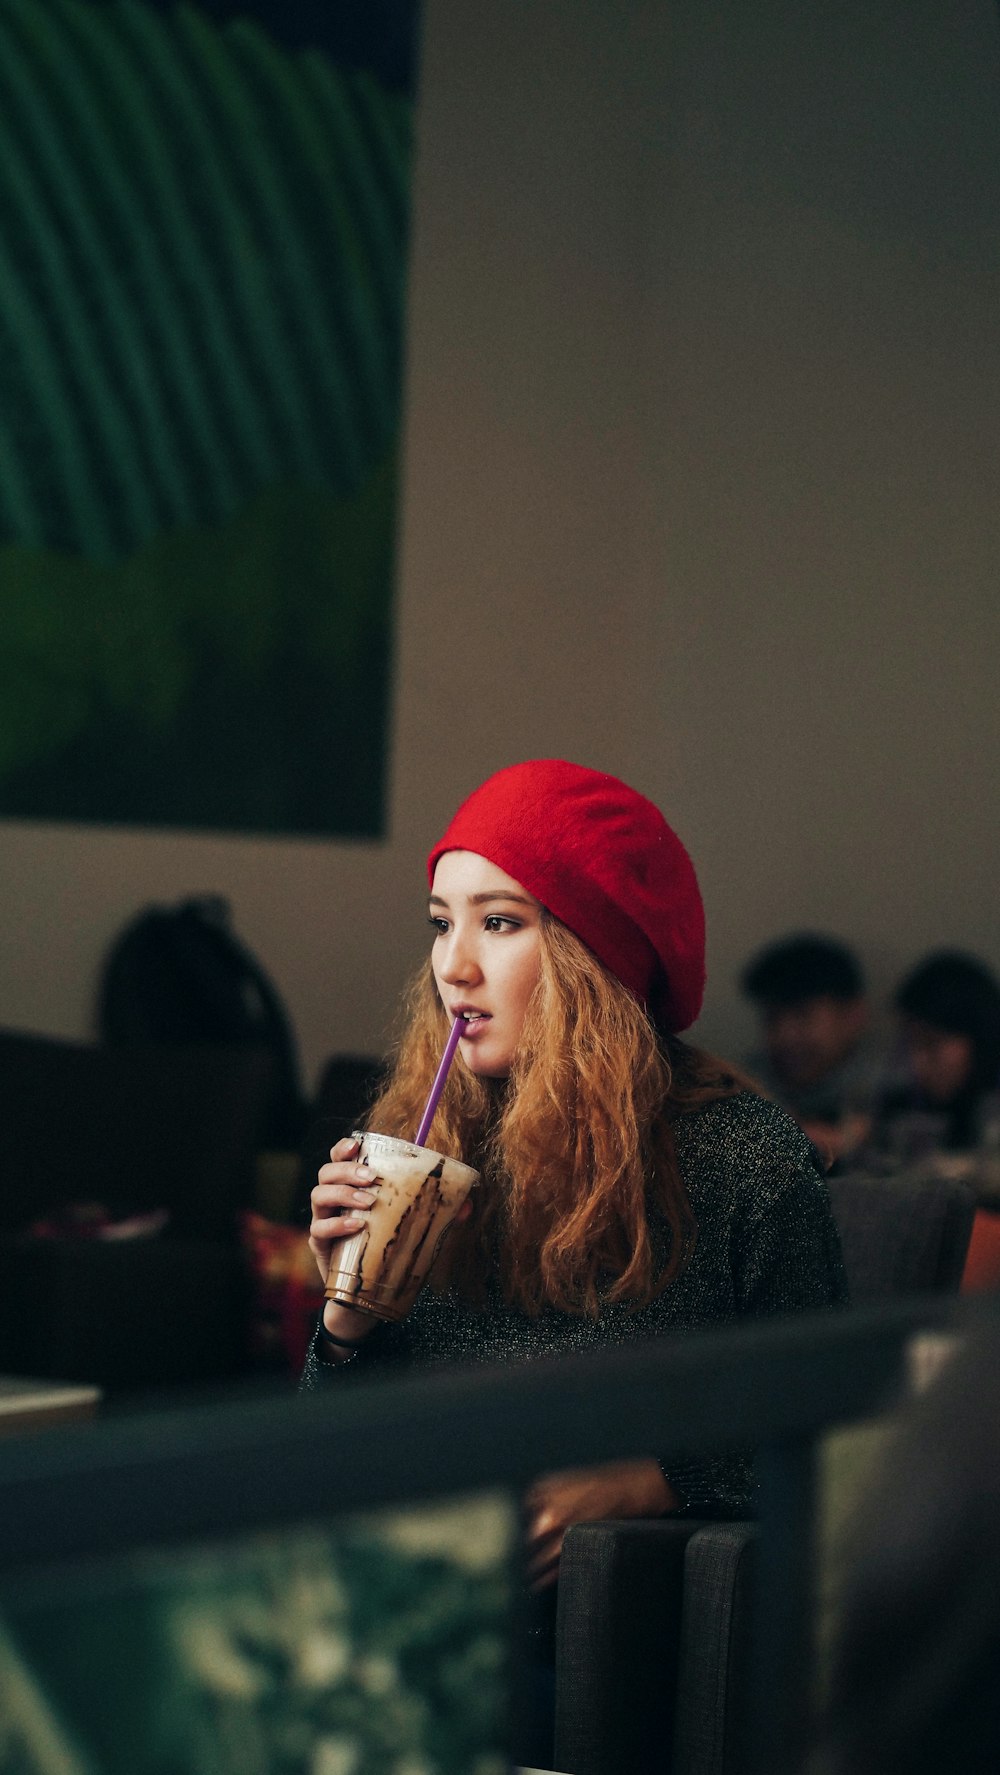 woman wearing black jacket and red knit cap holding drink in disposable solo cup